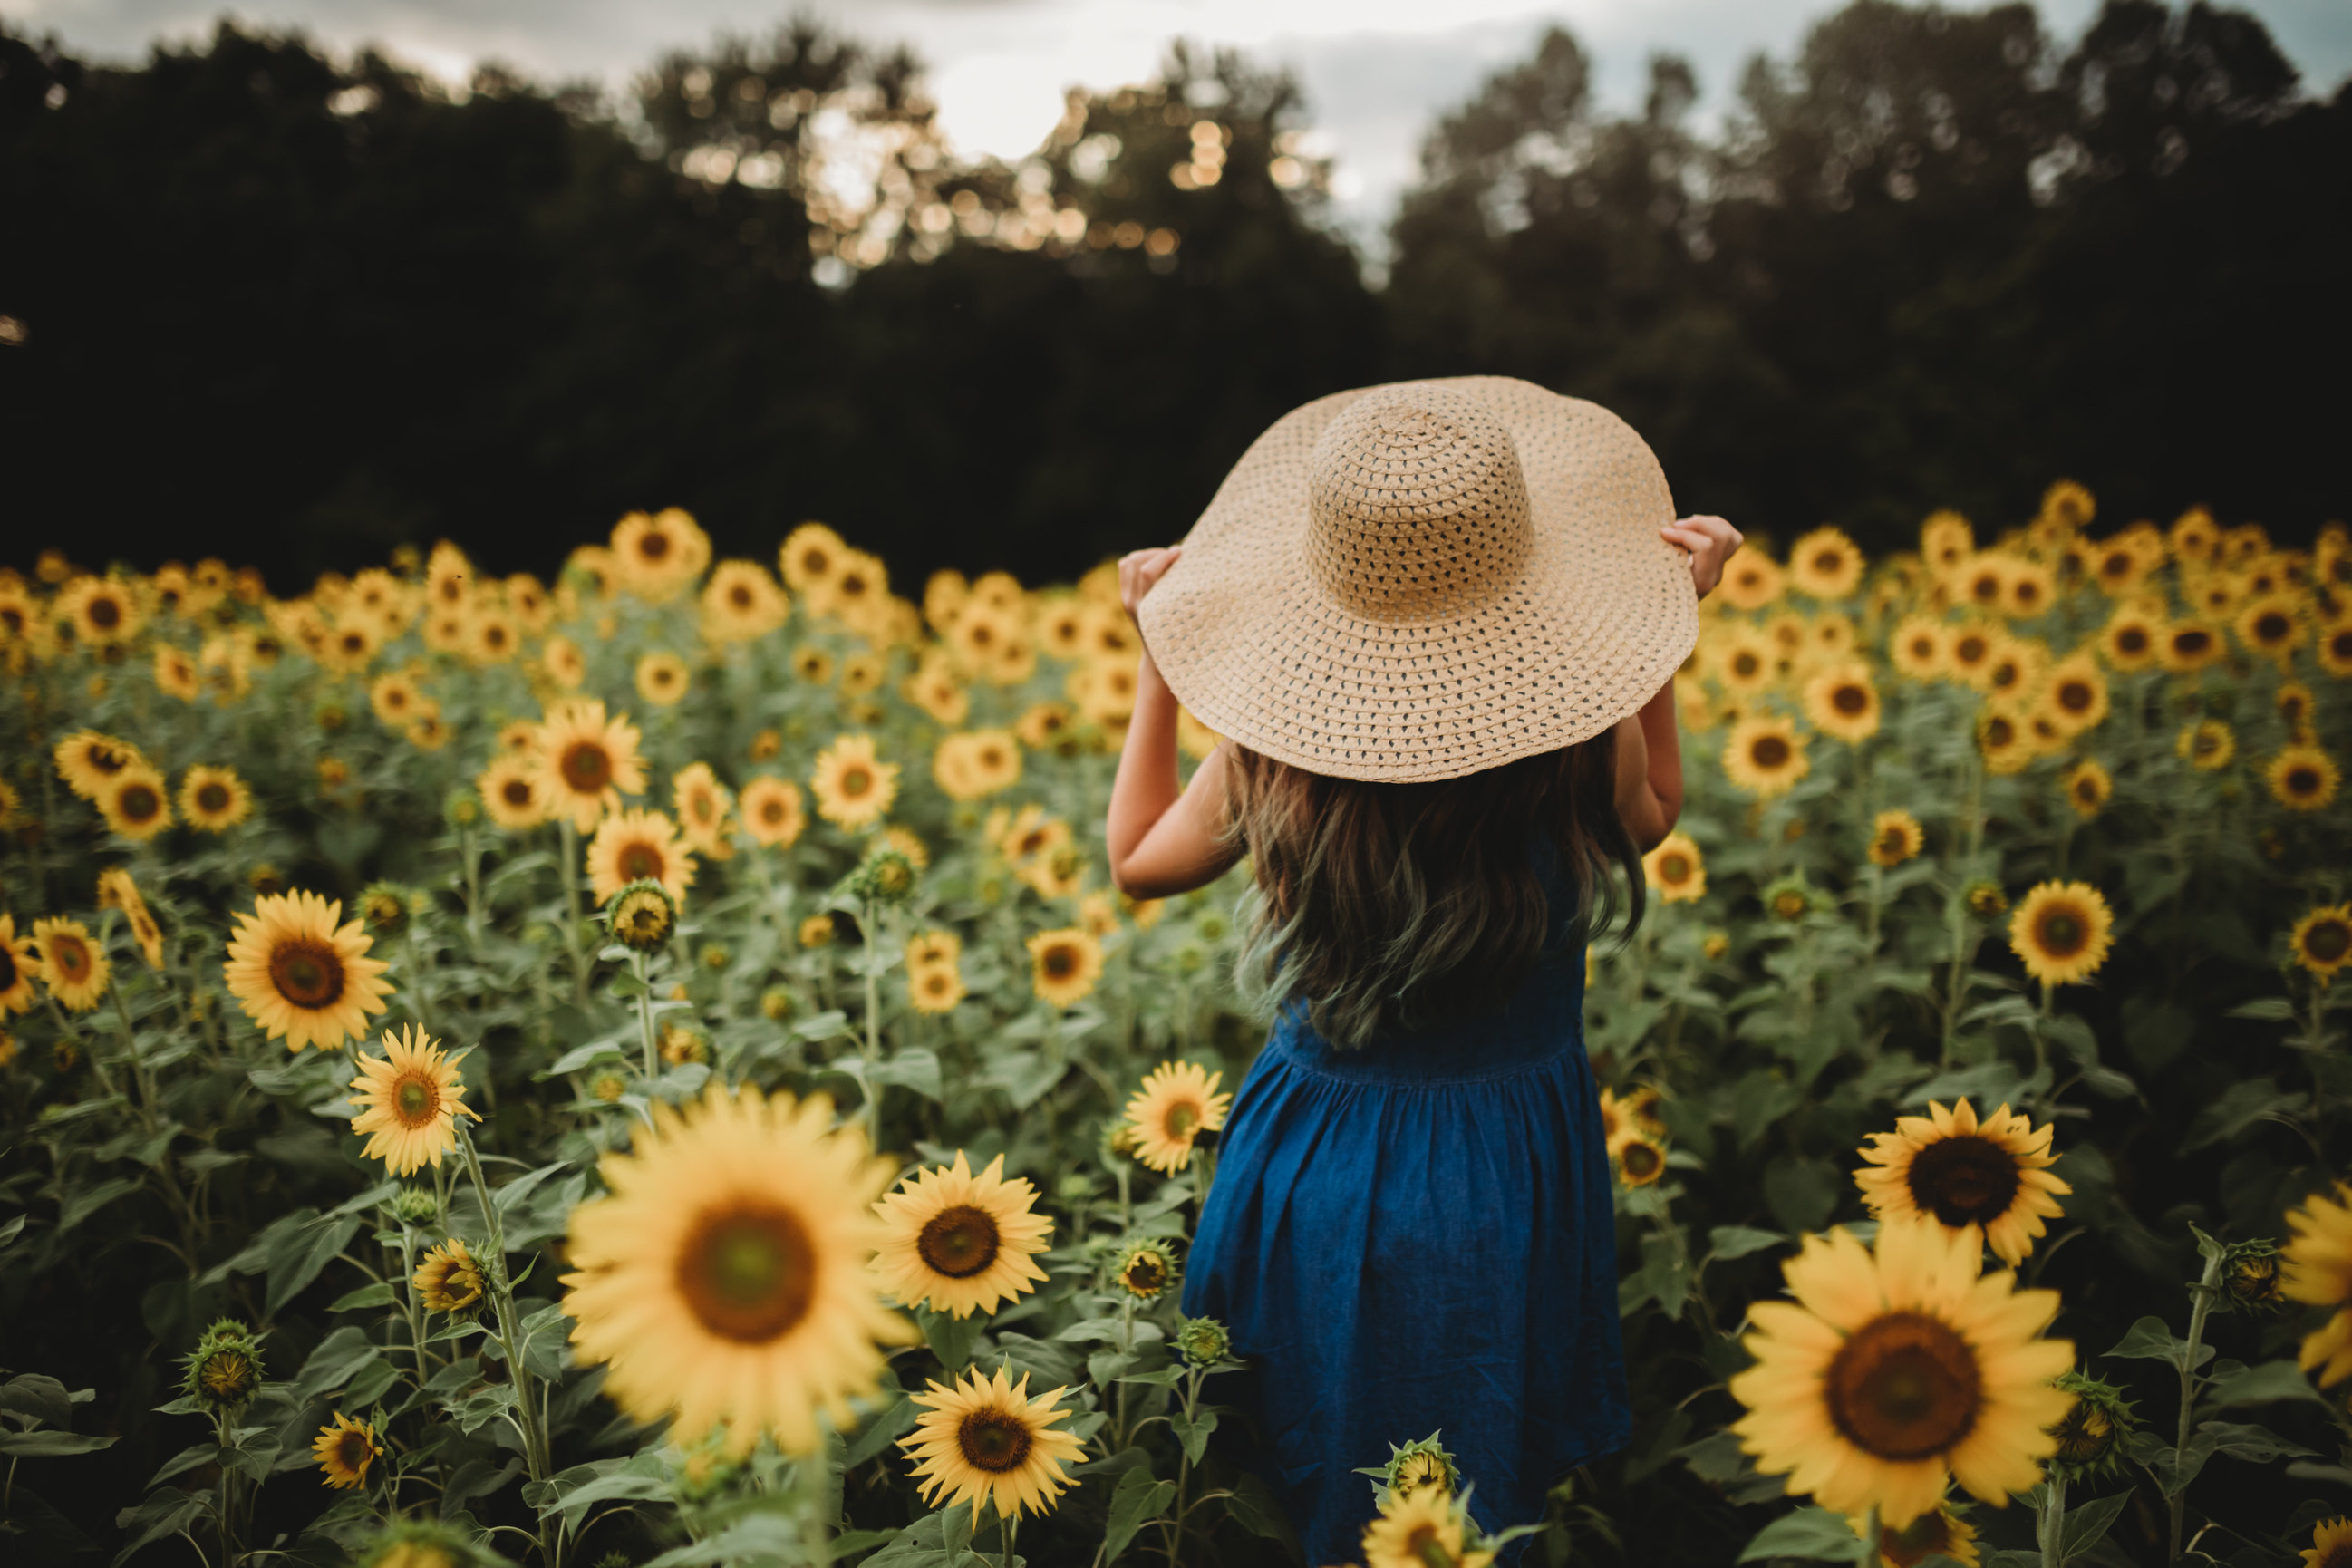 Sunflower Mini Sessions - Crystal Allen Photography